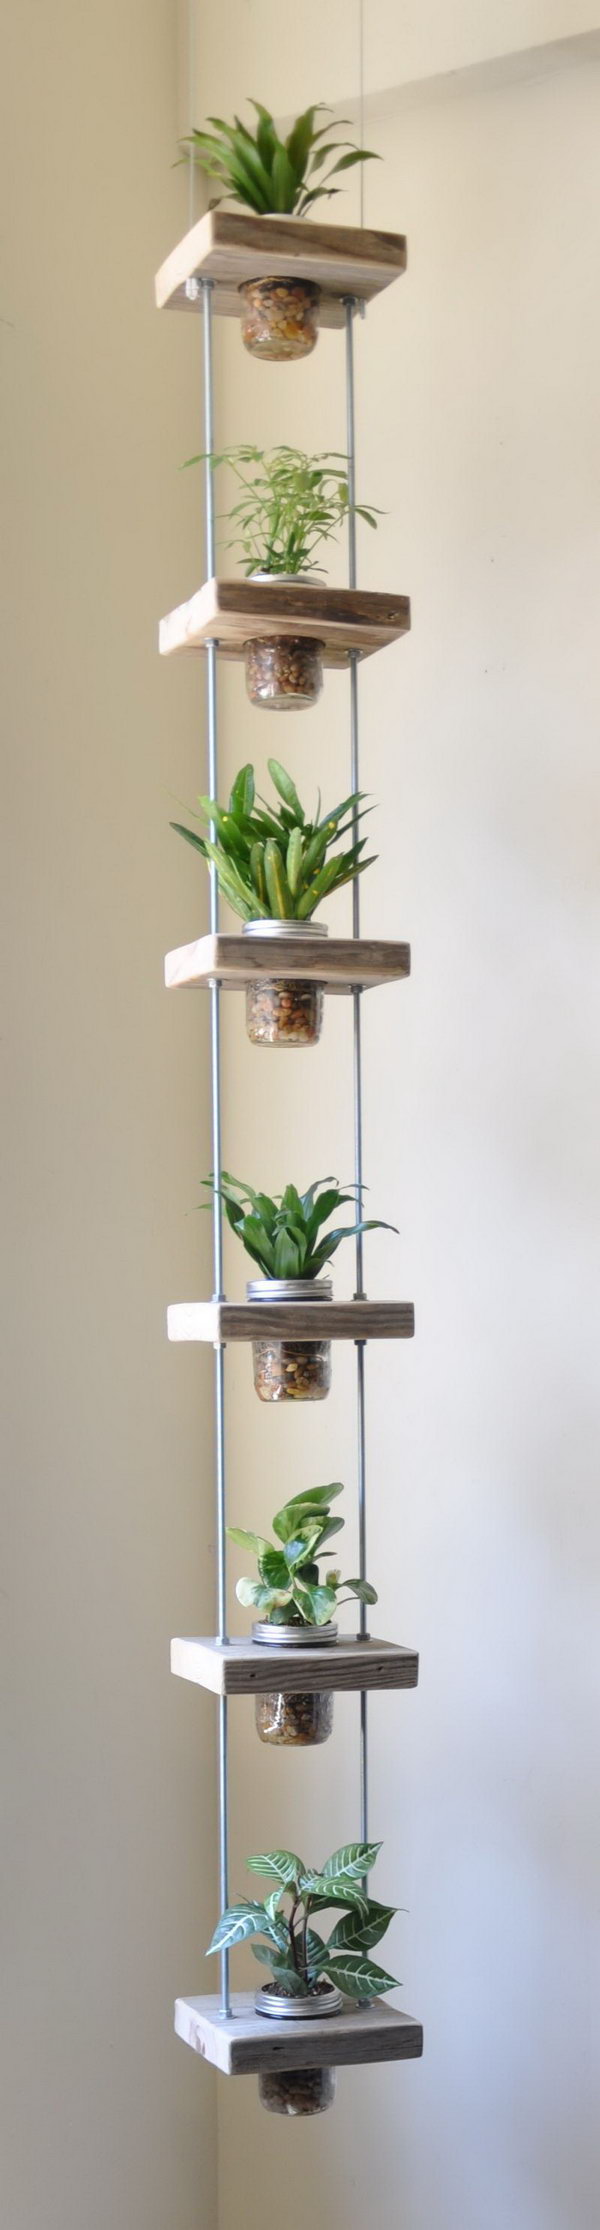 Vertical herb garden from salvaged wood and mason jars.